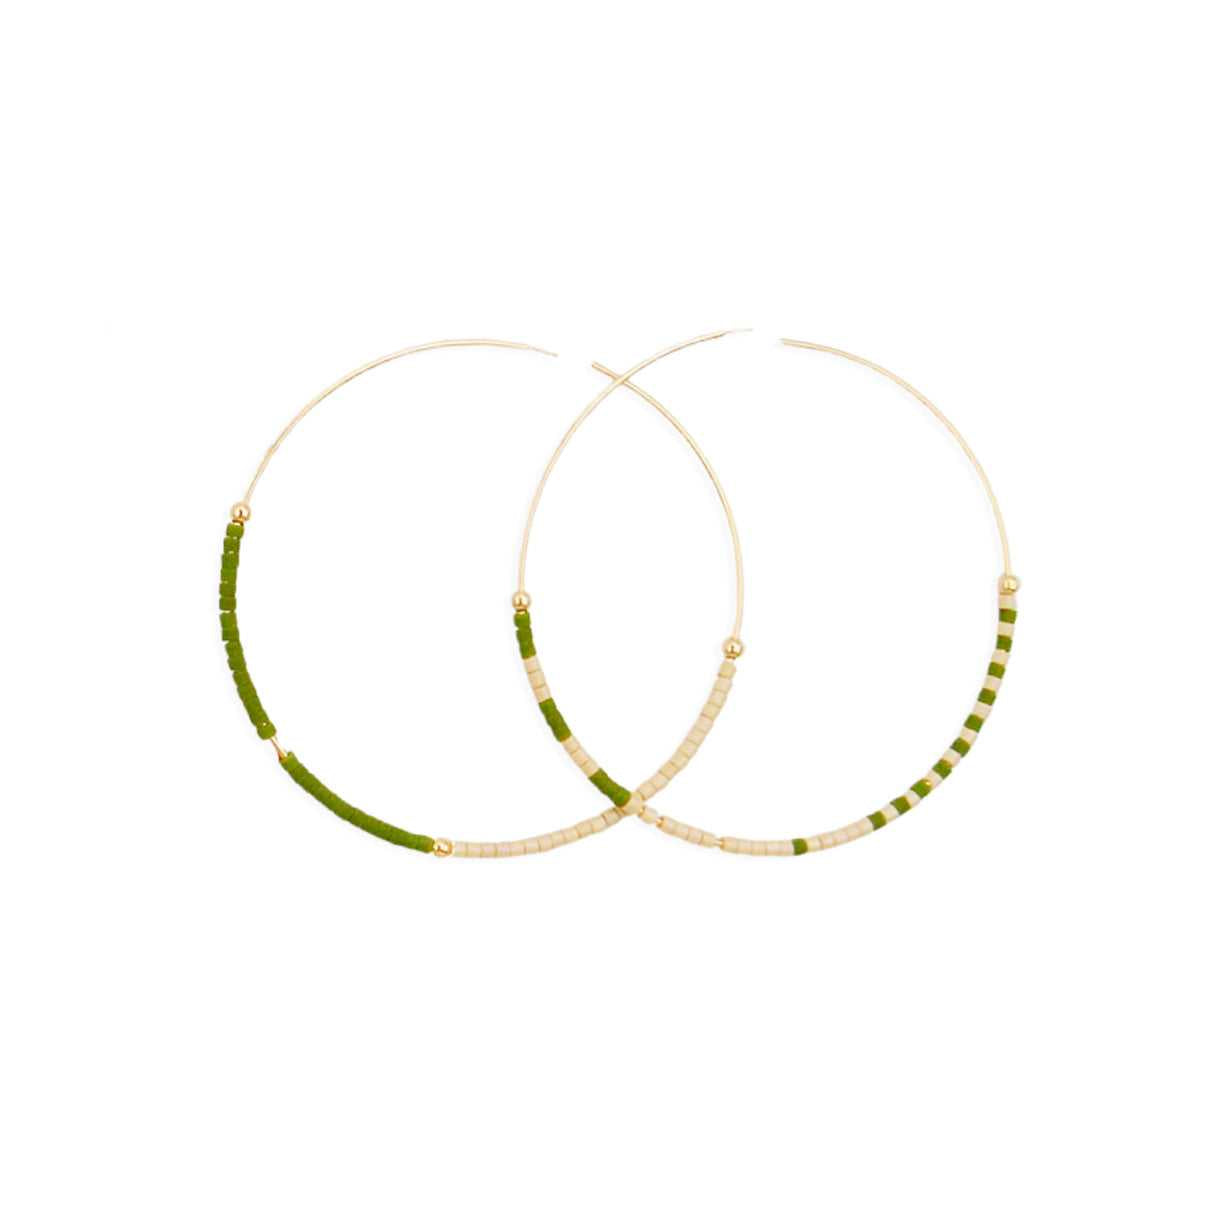 Avocado and Cream Glass Beaded Gold Filled Hoops